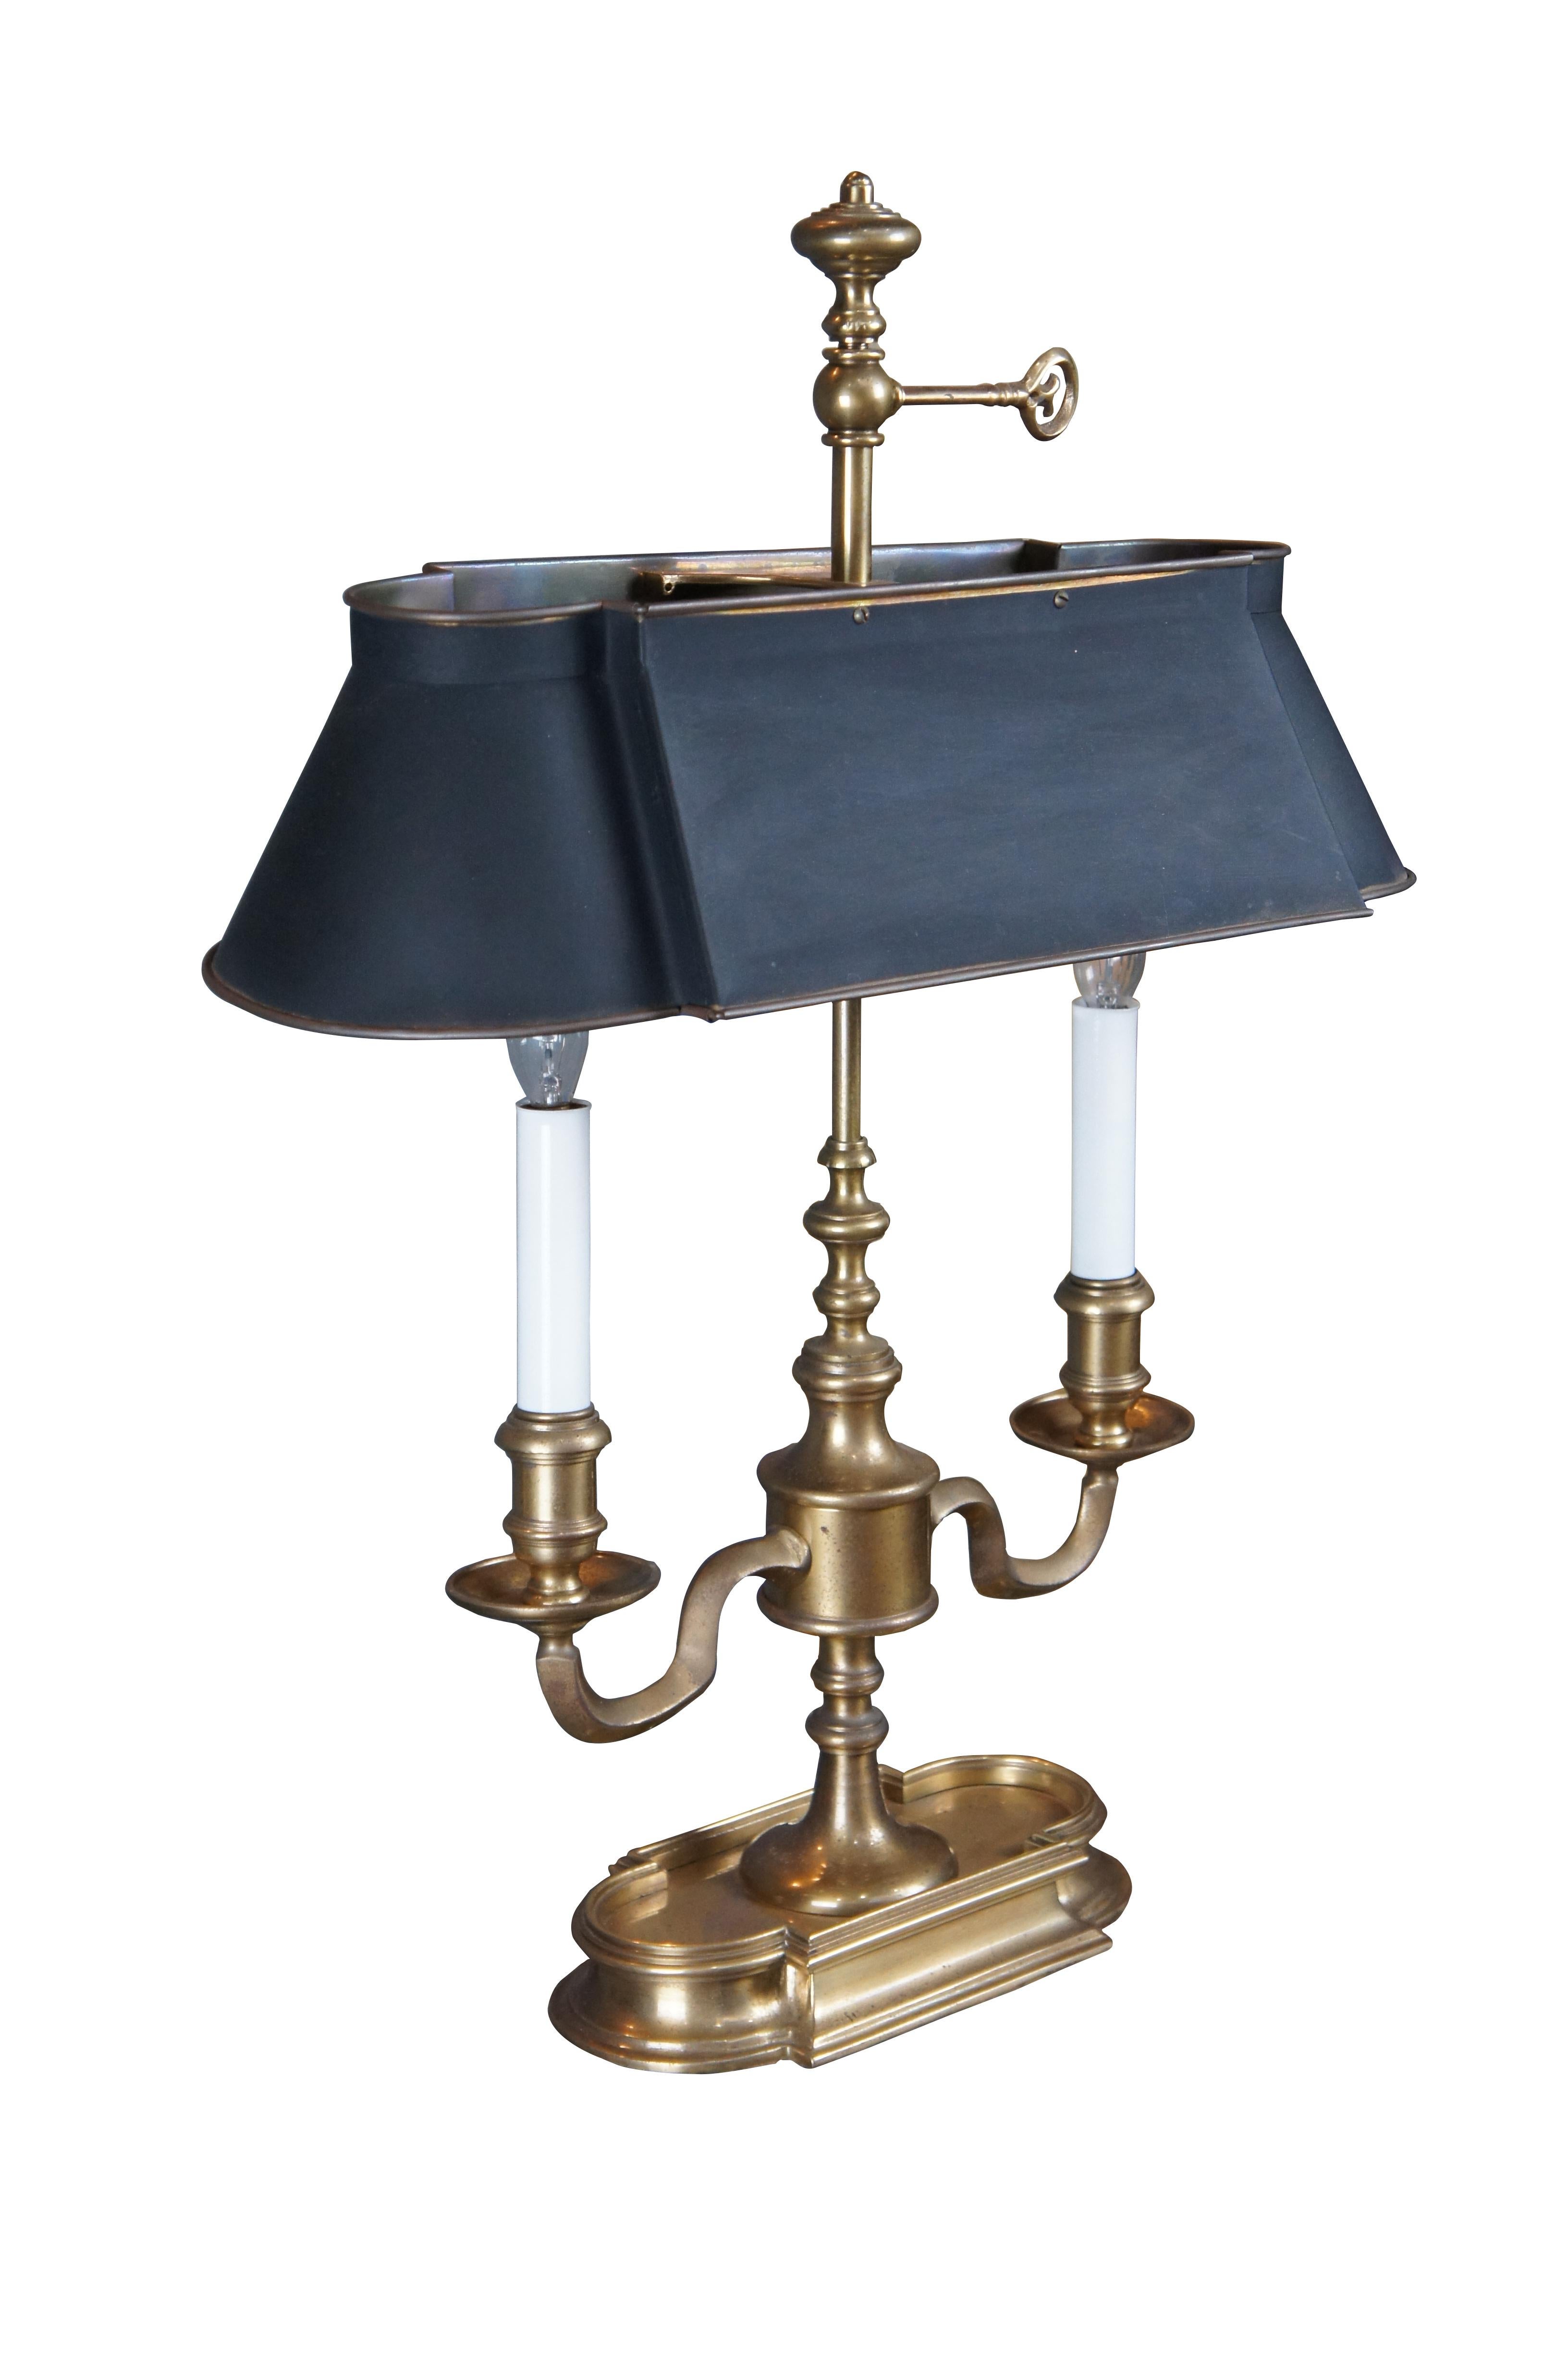 An exquisite Bouillotte lamp by Frederick Cooper, circa 1970s. Features a brass frame with two candlestick lights over an asymmetrical quatrefoil base. The lamp is fitted with a back tole shade in matching form to the base. Great for use on a desk,